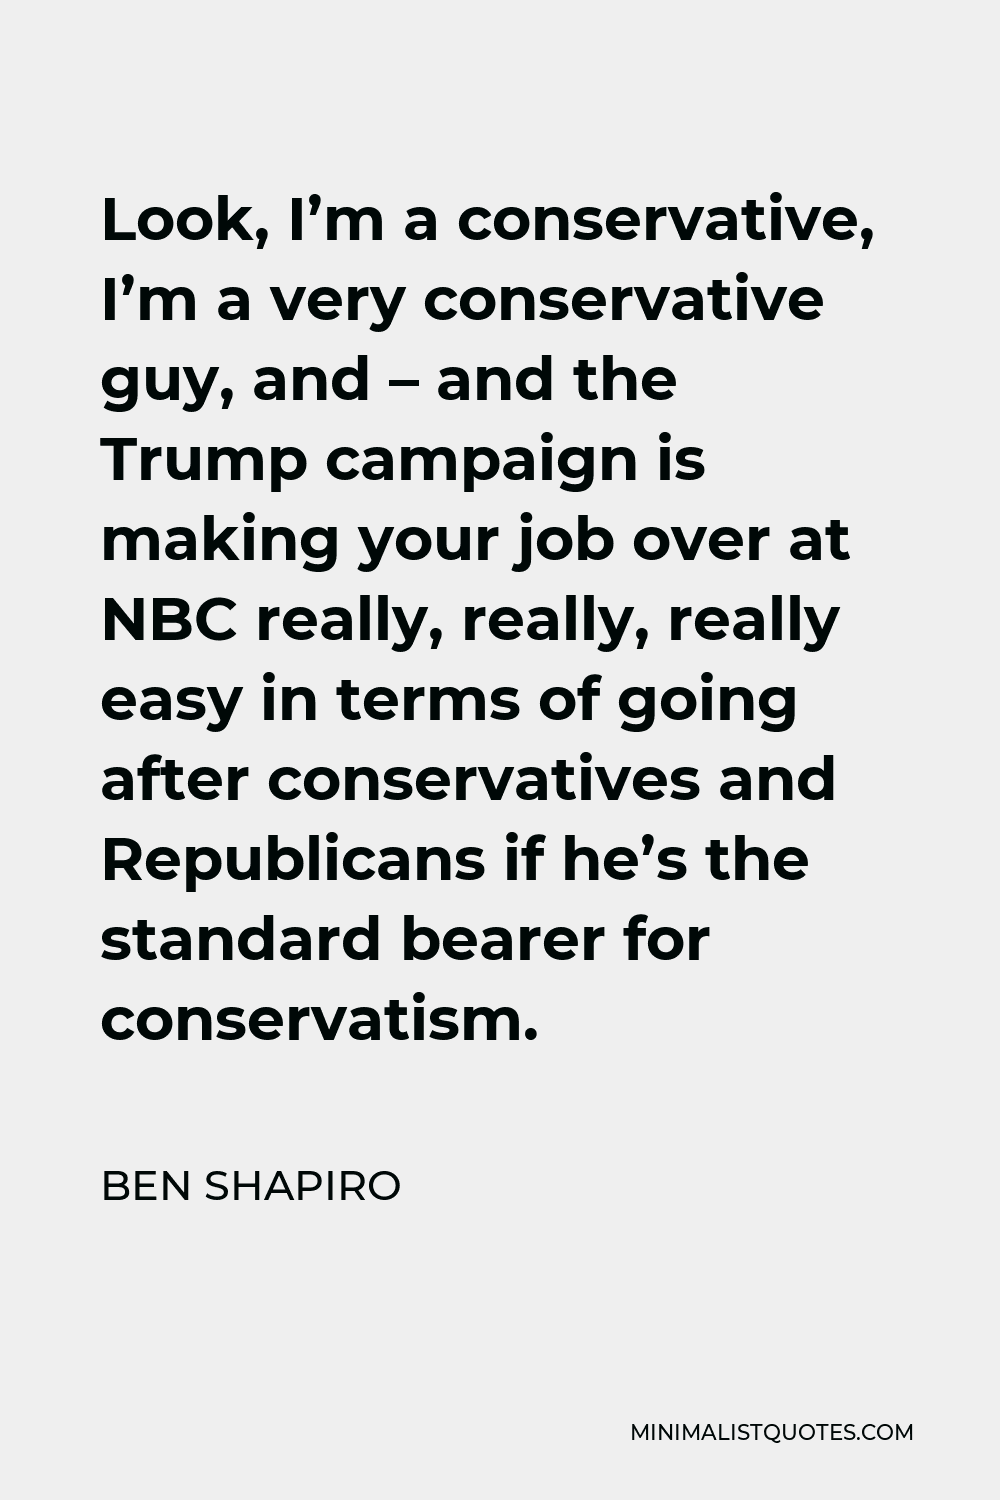 Ben Shapiro Quote - Look, I’m a conservative, I’m a very conservative guy, and – and the Trump campaign is making your job over at NBC really, really, really easy in terms of going after conservatives and Republicans if he’s the standard bearer for conservatism.